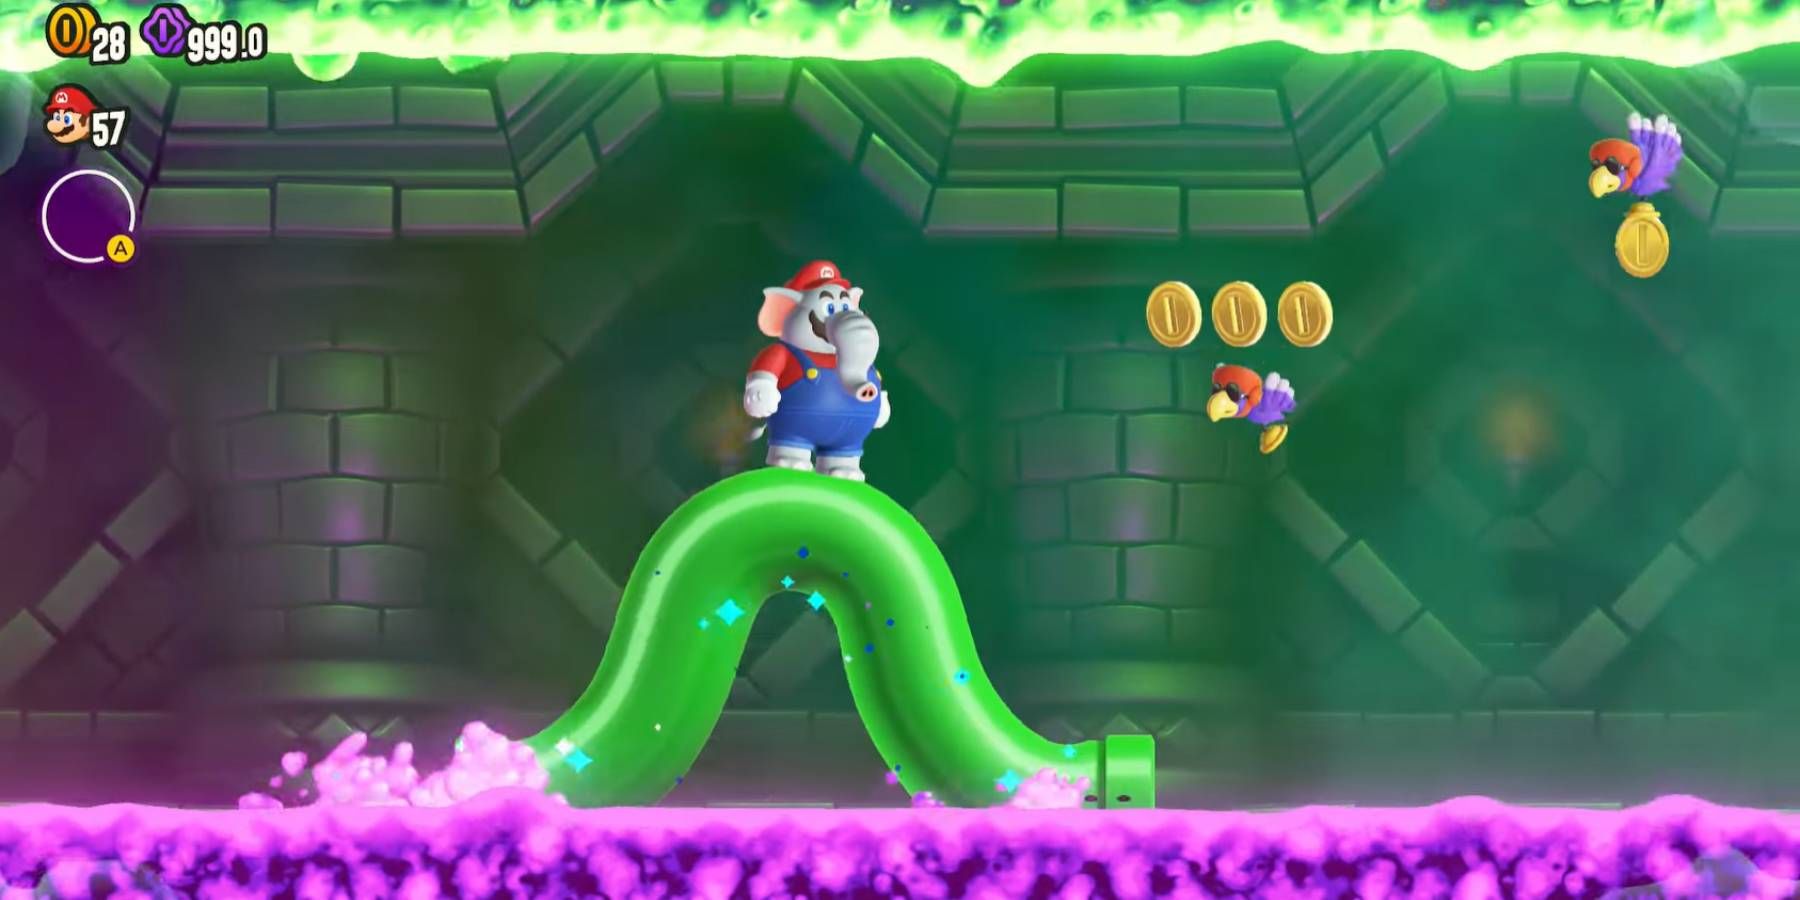 Elephant Mario riding a living pipe in The Final Test from Super Mario Bros. Wonder